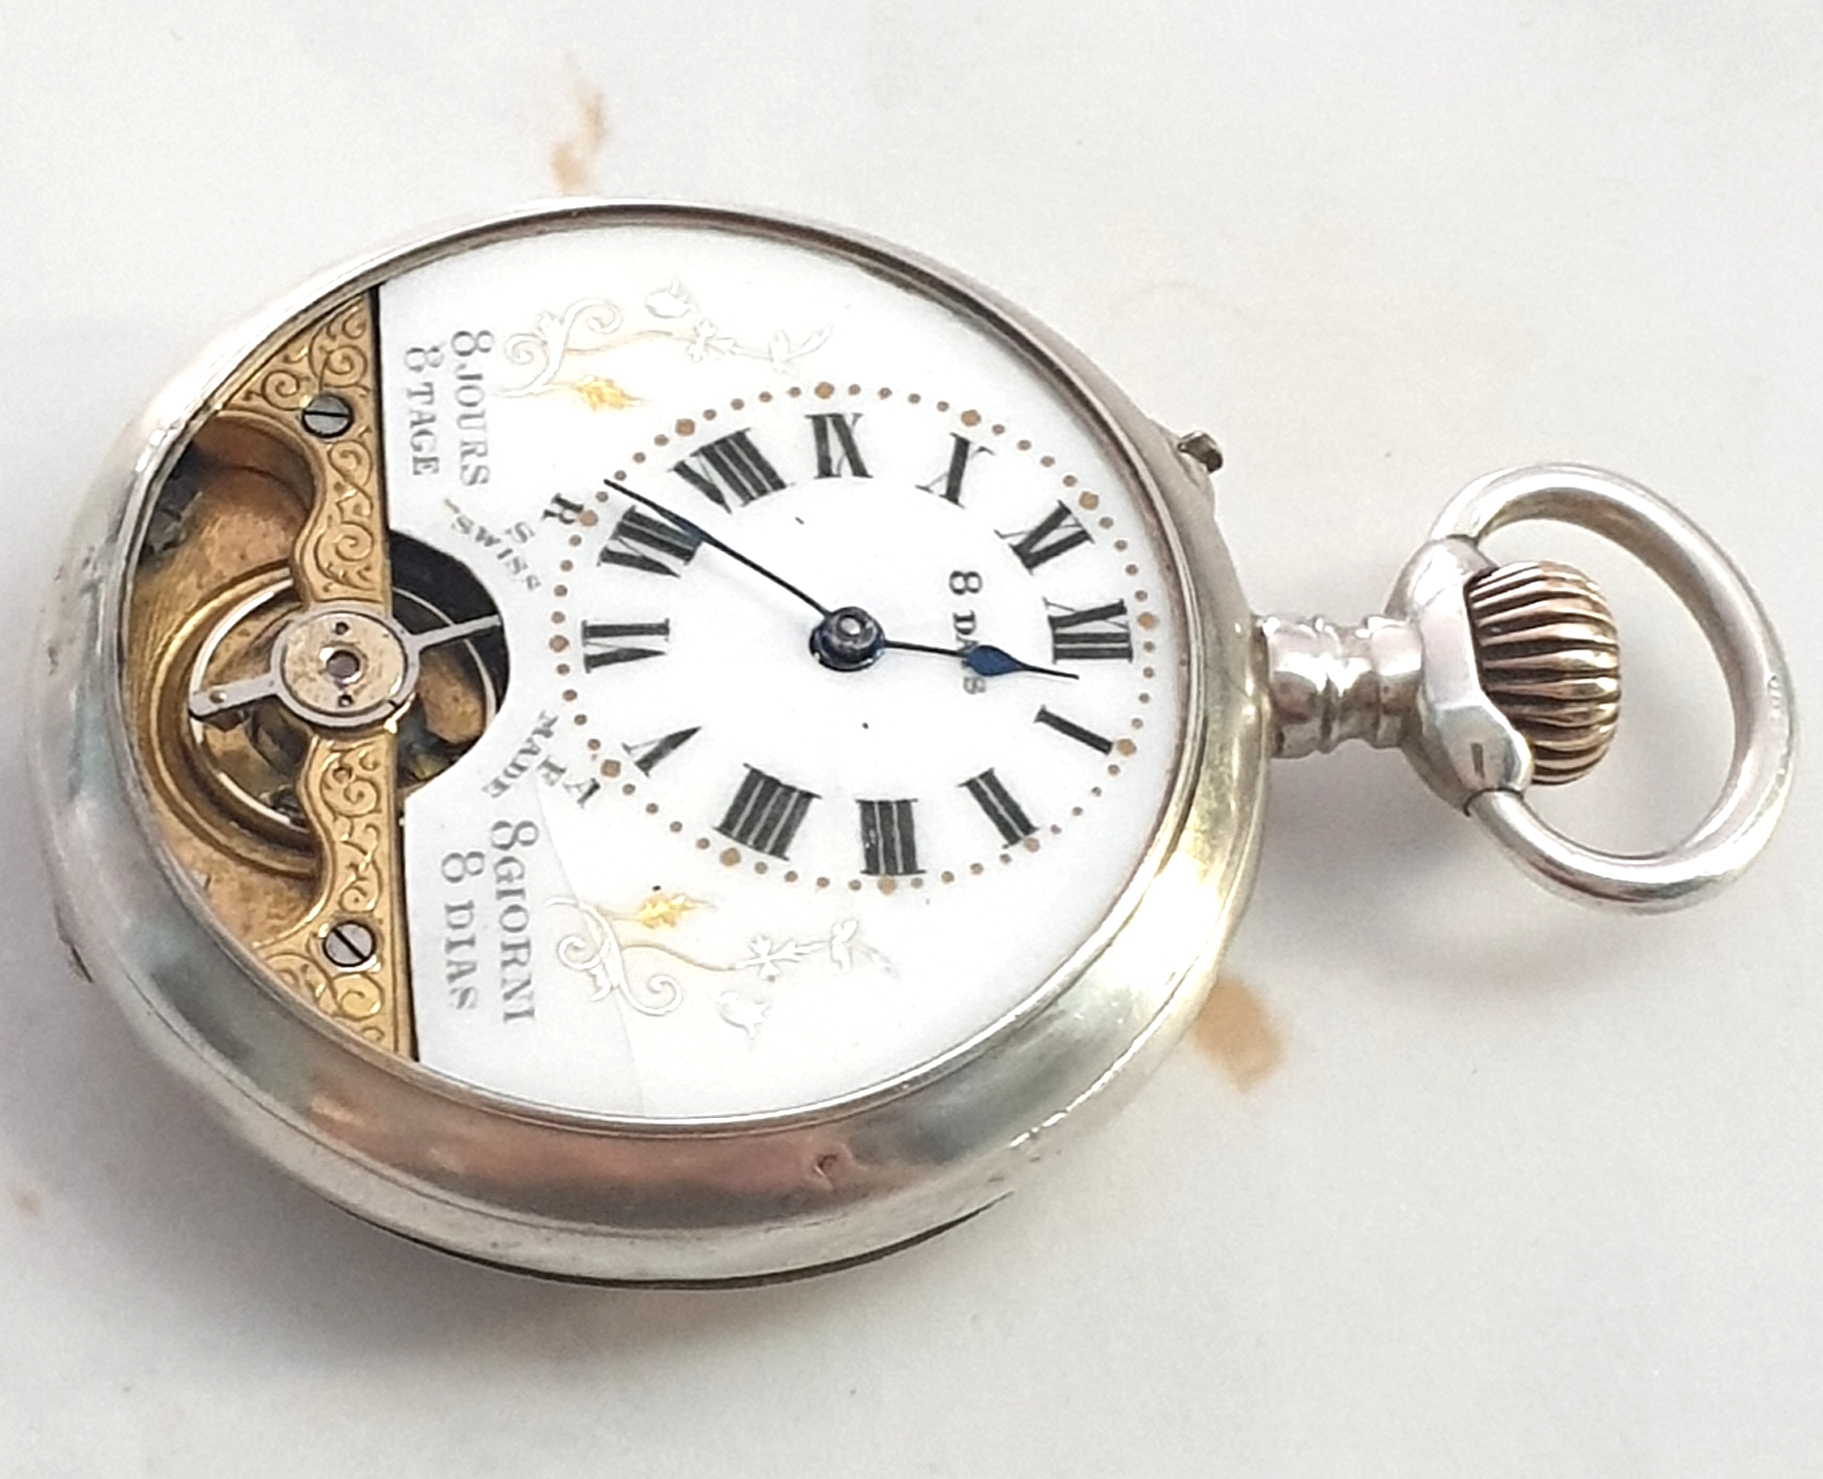 8 DAY HEBDOMAS TOP WIND POCKET WATCH WITH ENAMELLED DIAL AND VISIBLE ESCAPEMENT IN STERLING SILVER - Image 2 of 13